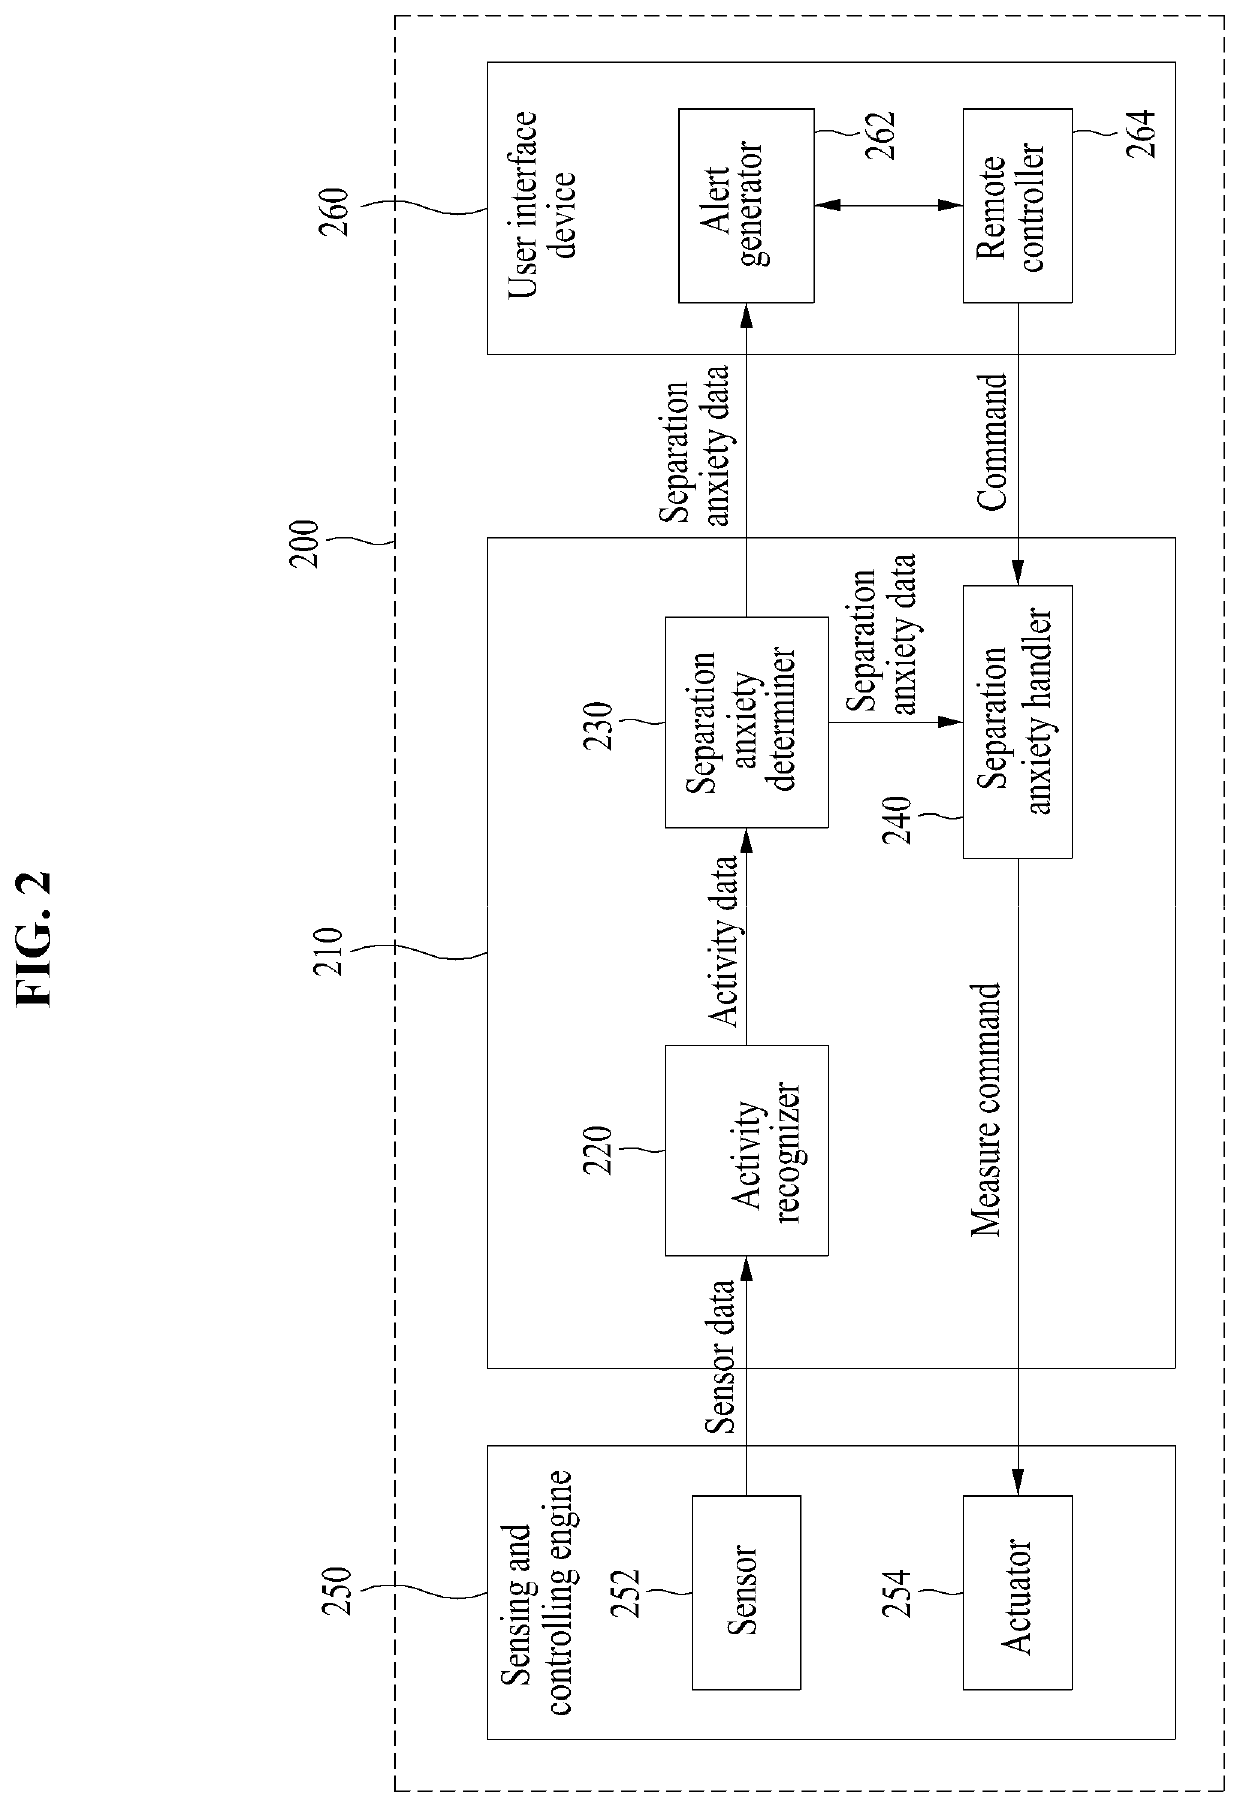 IOT based monitoring method and system for detecting separation anxiety of pet using support vector machine and complex event processing